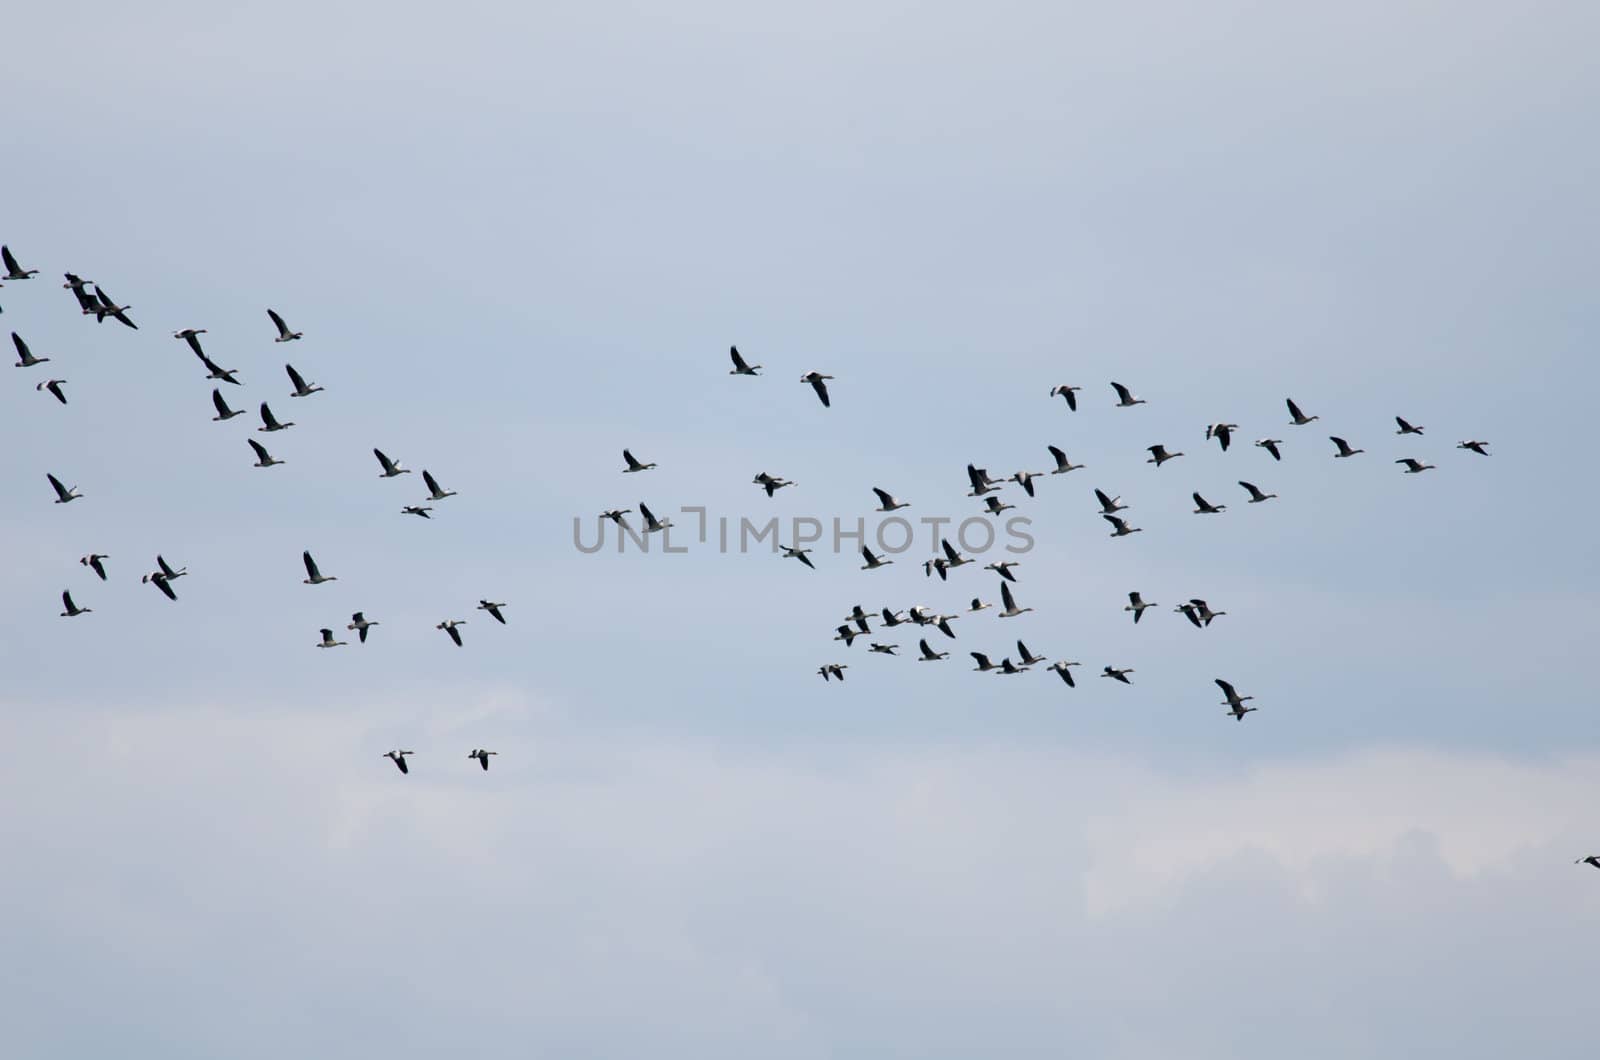 the migration of wild geese by njaj